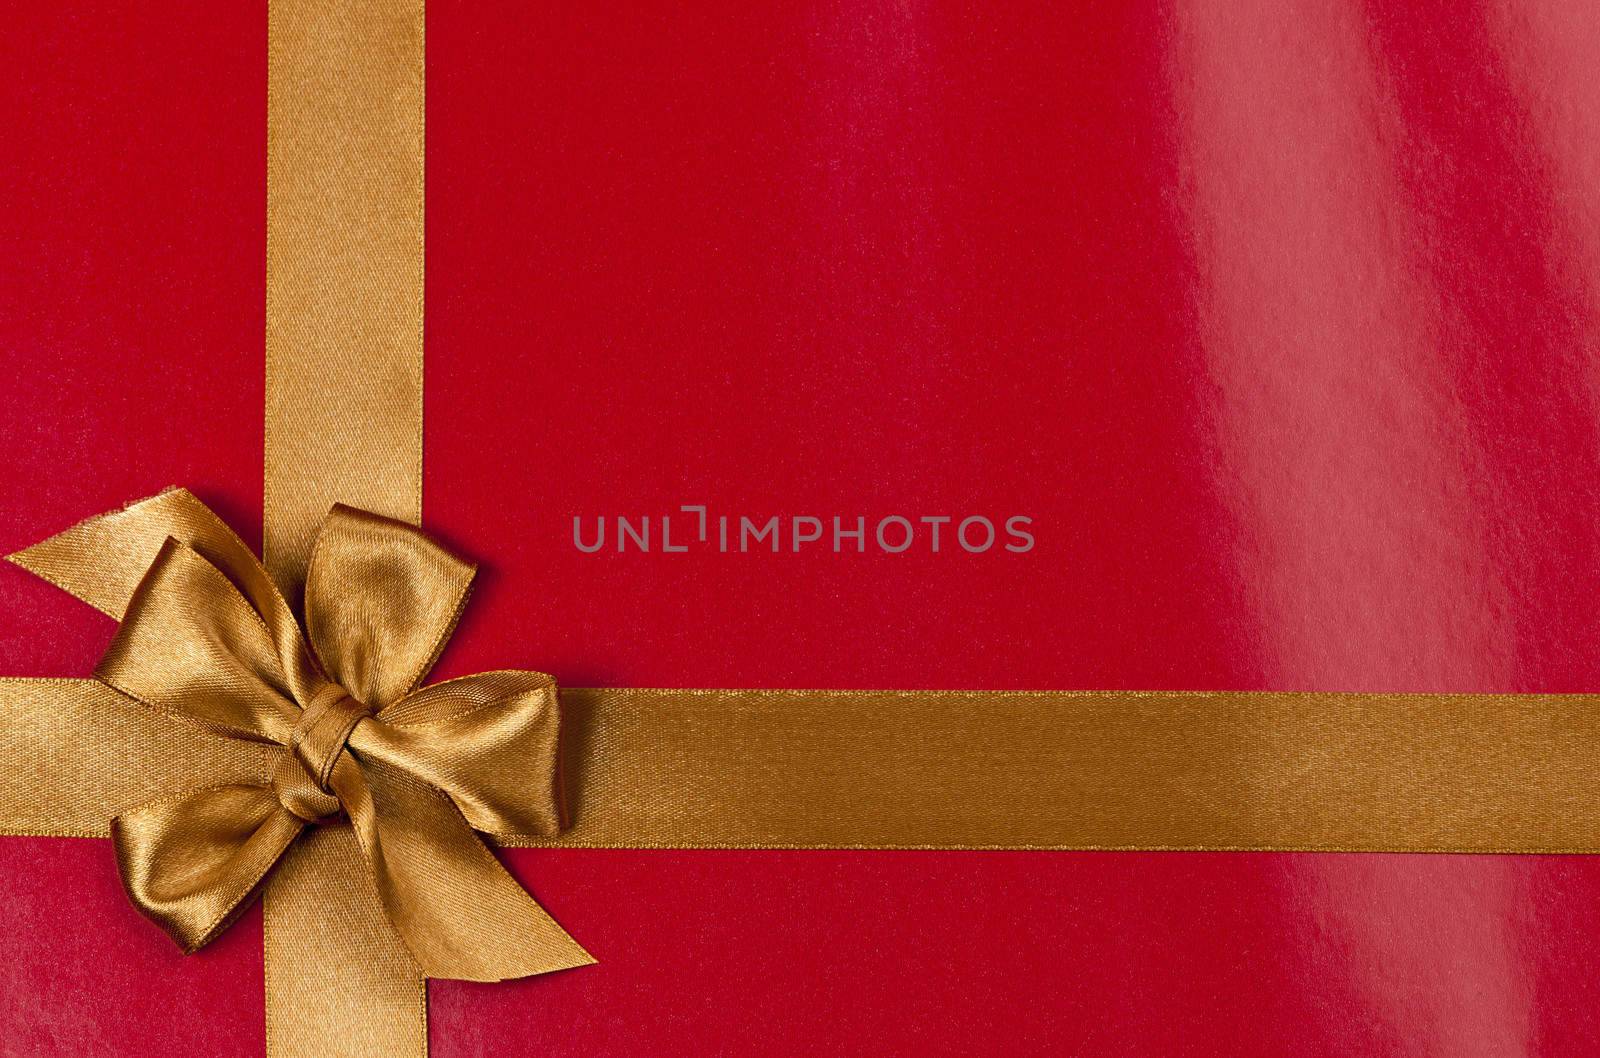 Red background of present wrapped with gold satin ribbon and bow